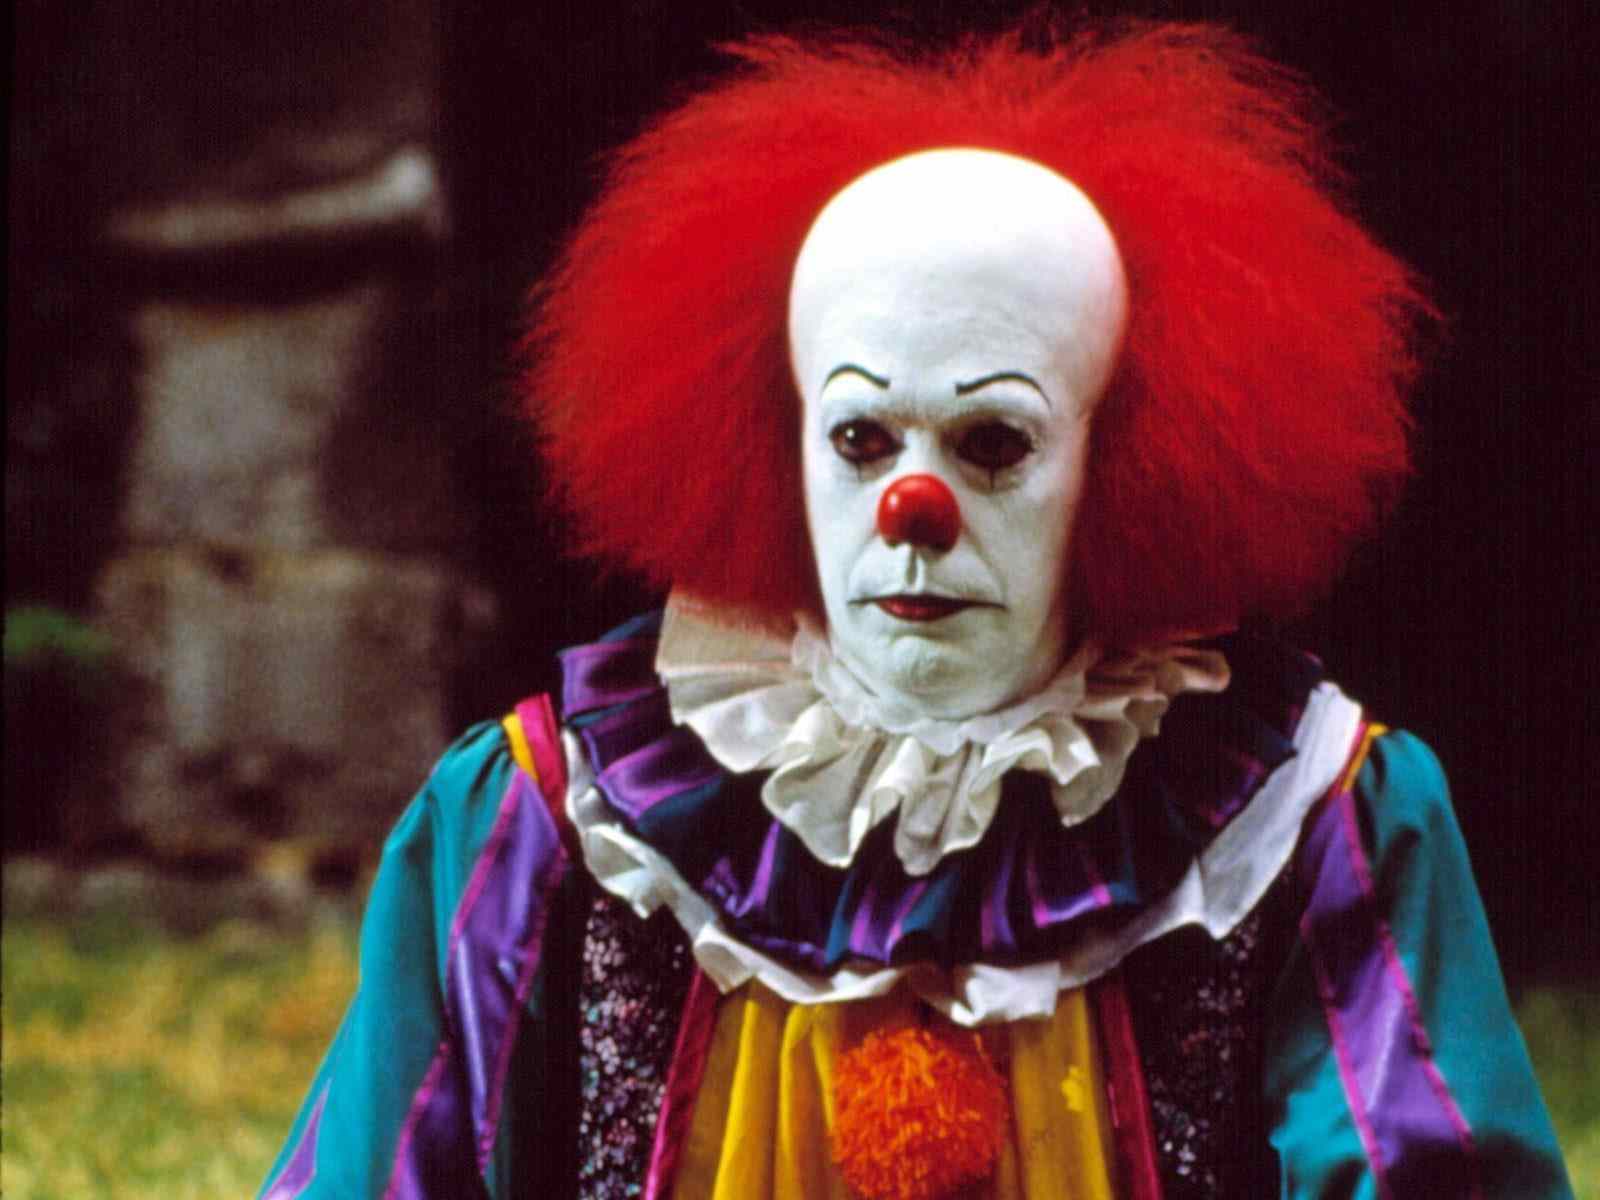 Pennywise the clown from IT.